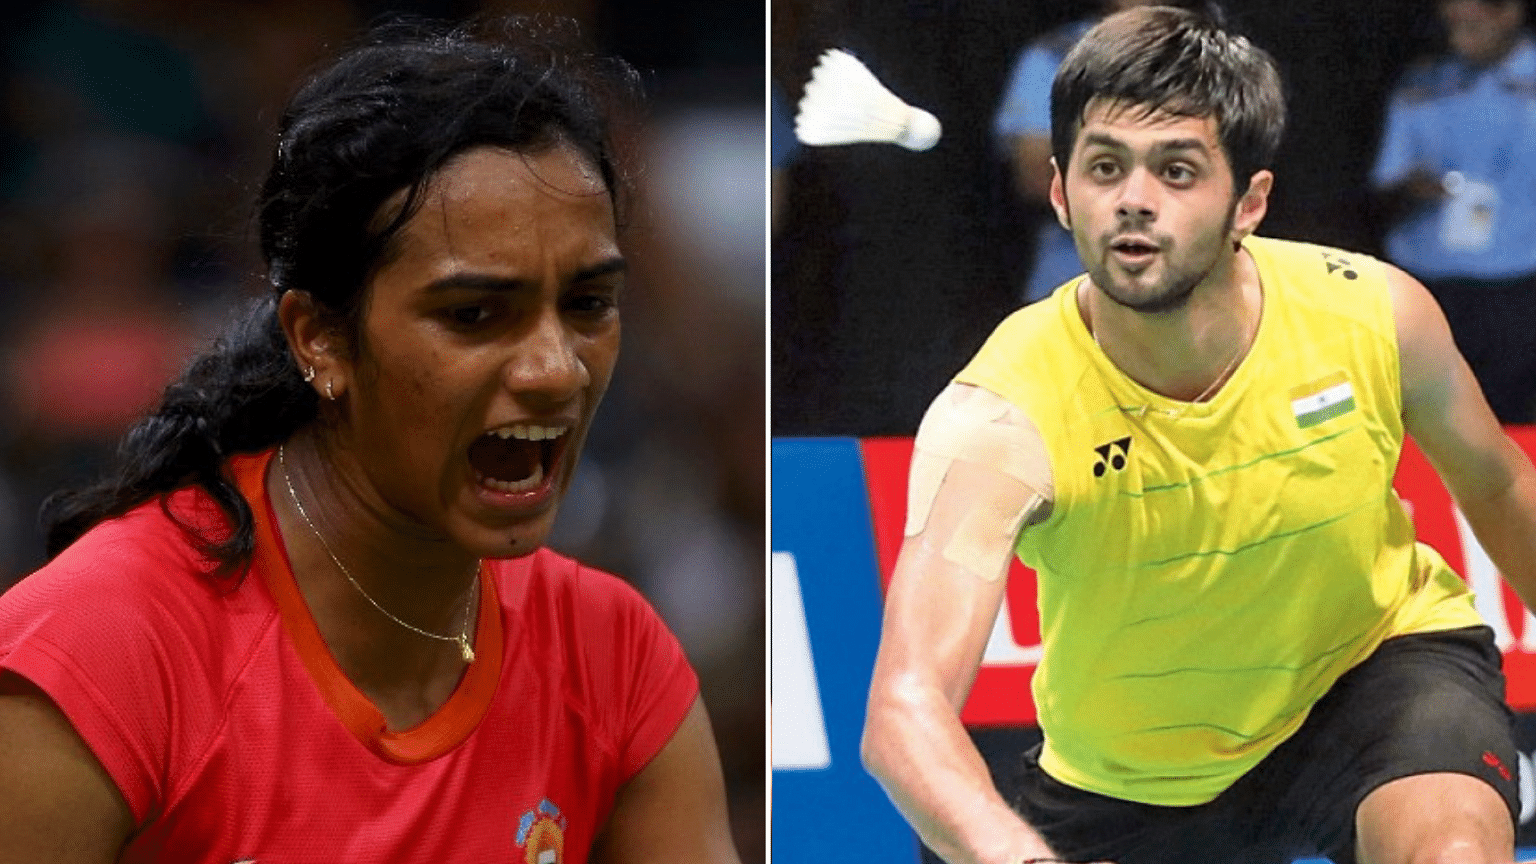 Both Sindhu (left) and Praneeth had convincing wins to enter the quarterfinals of the BWF World Championships in Basel.